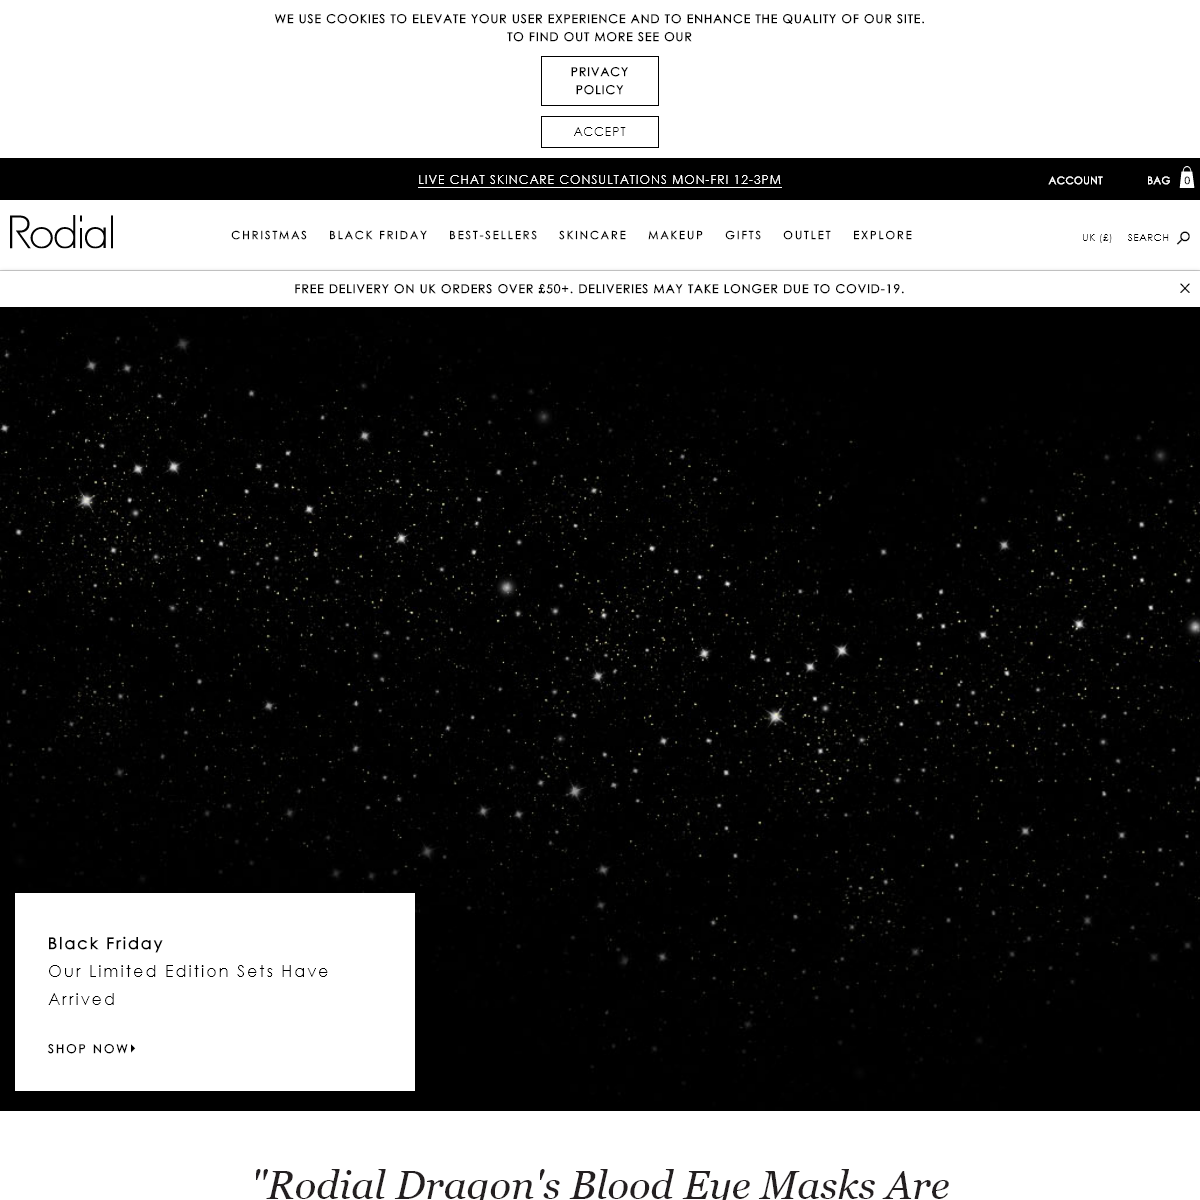 A complete backup of rodial.co.uk